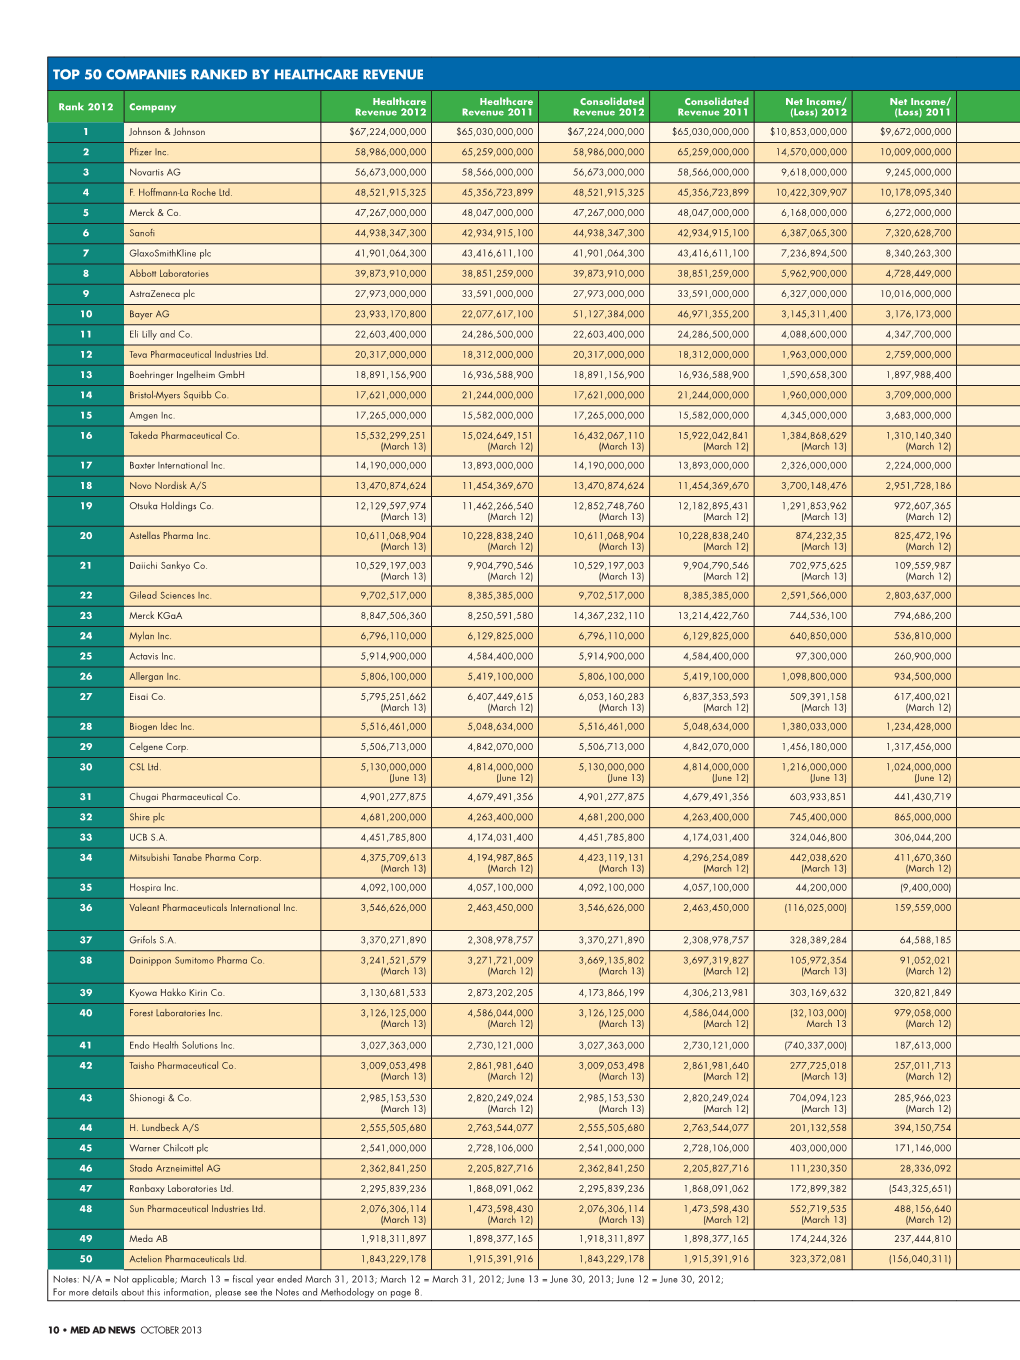 Top 50 Companies Ranked by Healthcare Revenue